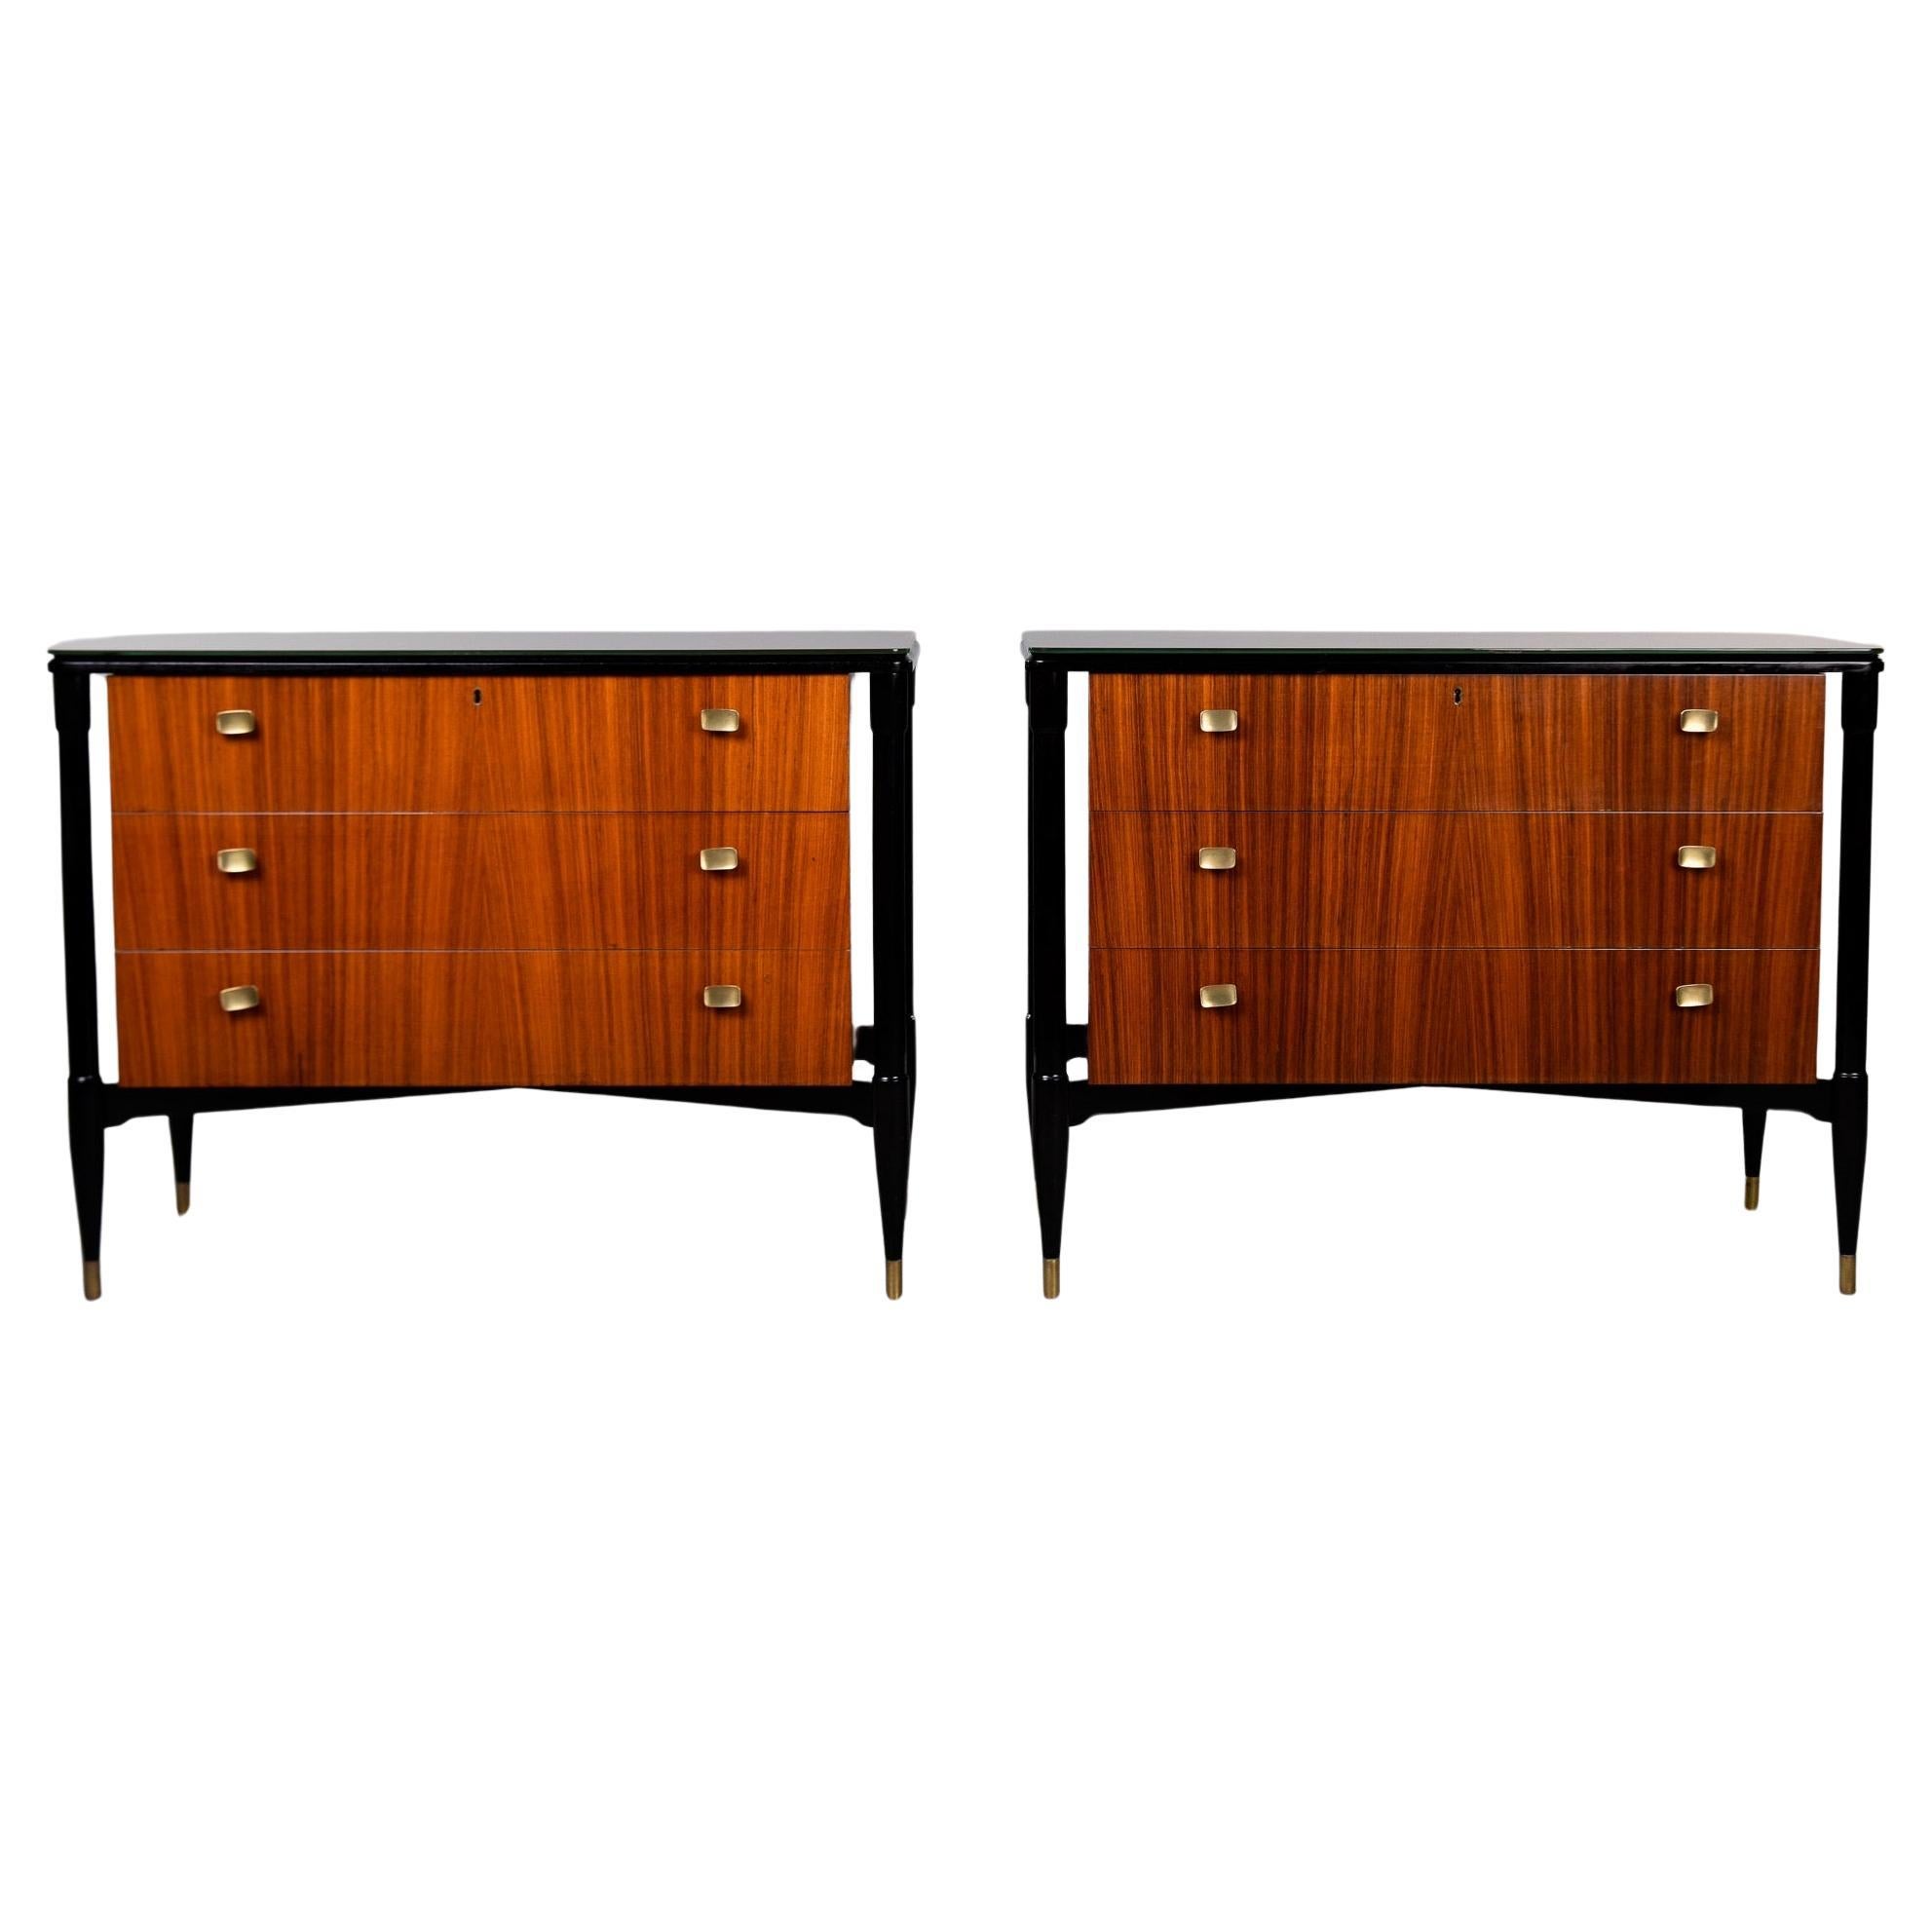 Pair Vintage Italian Mahogany 3 Drawer Side Chests with Black Legs & Brass Feet For Sale